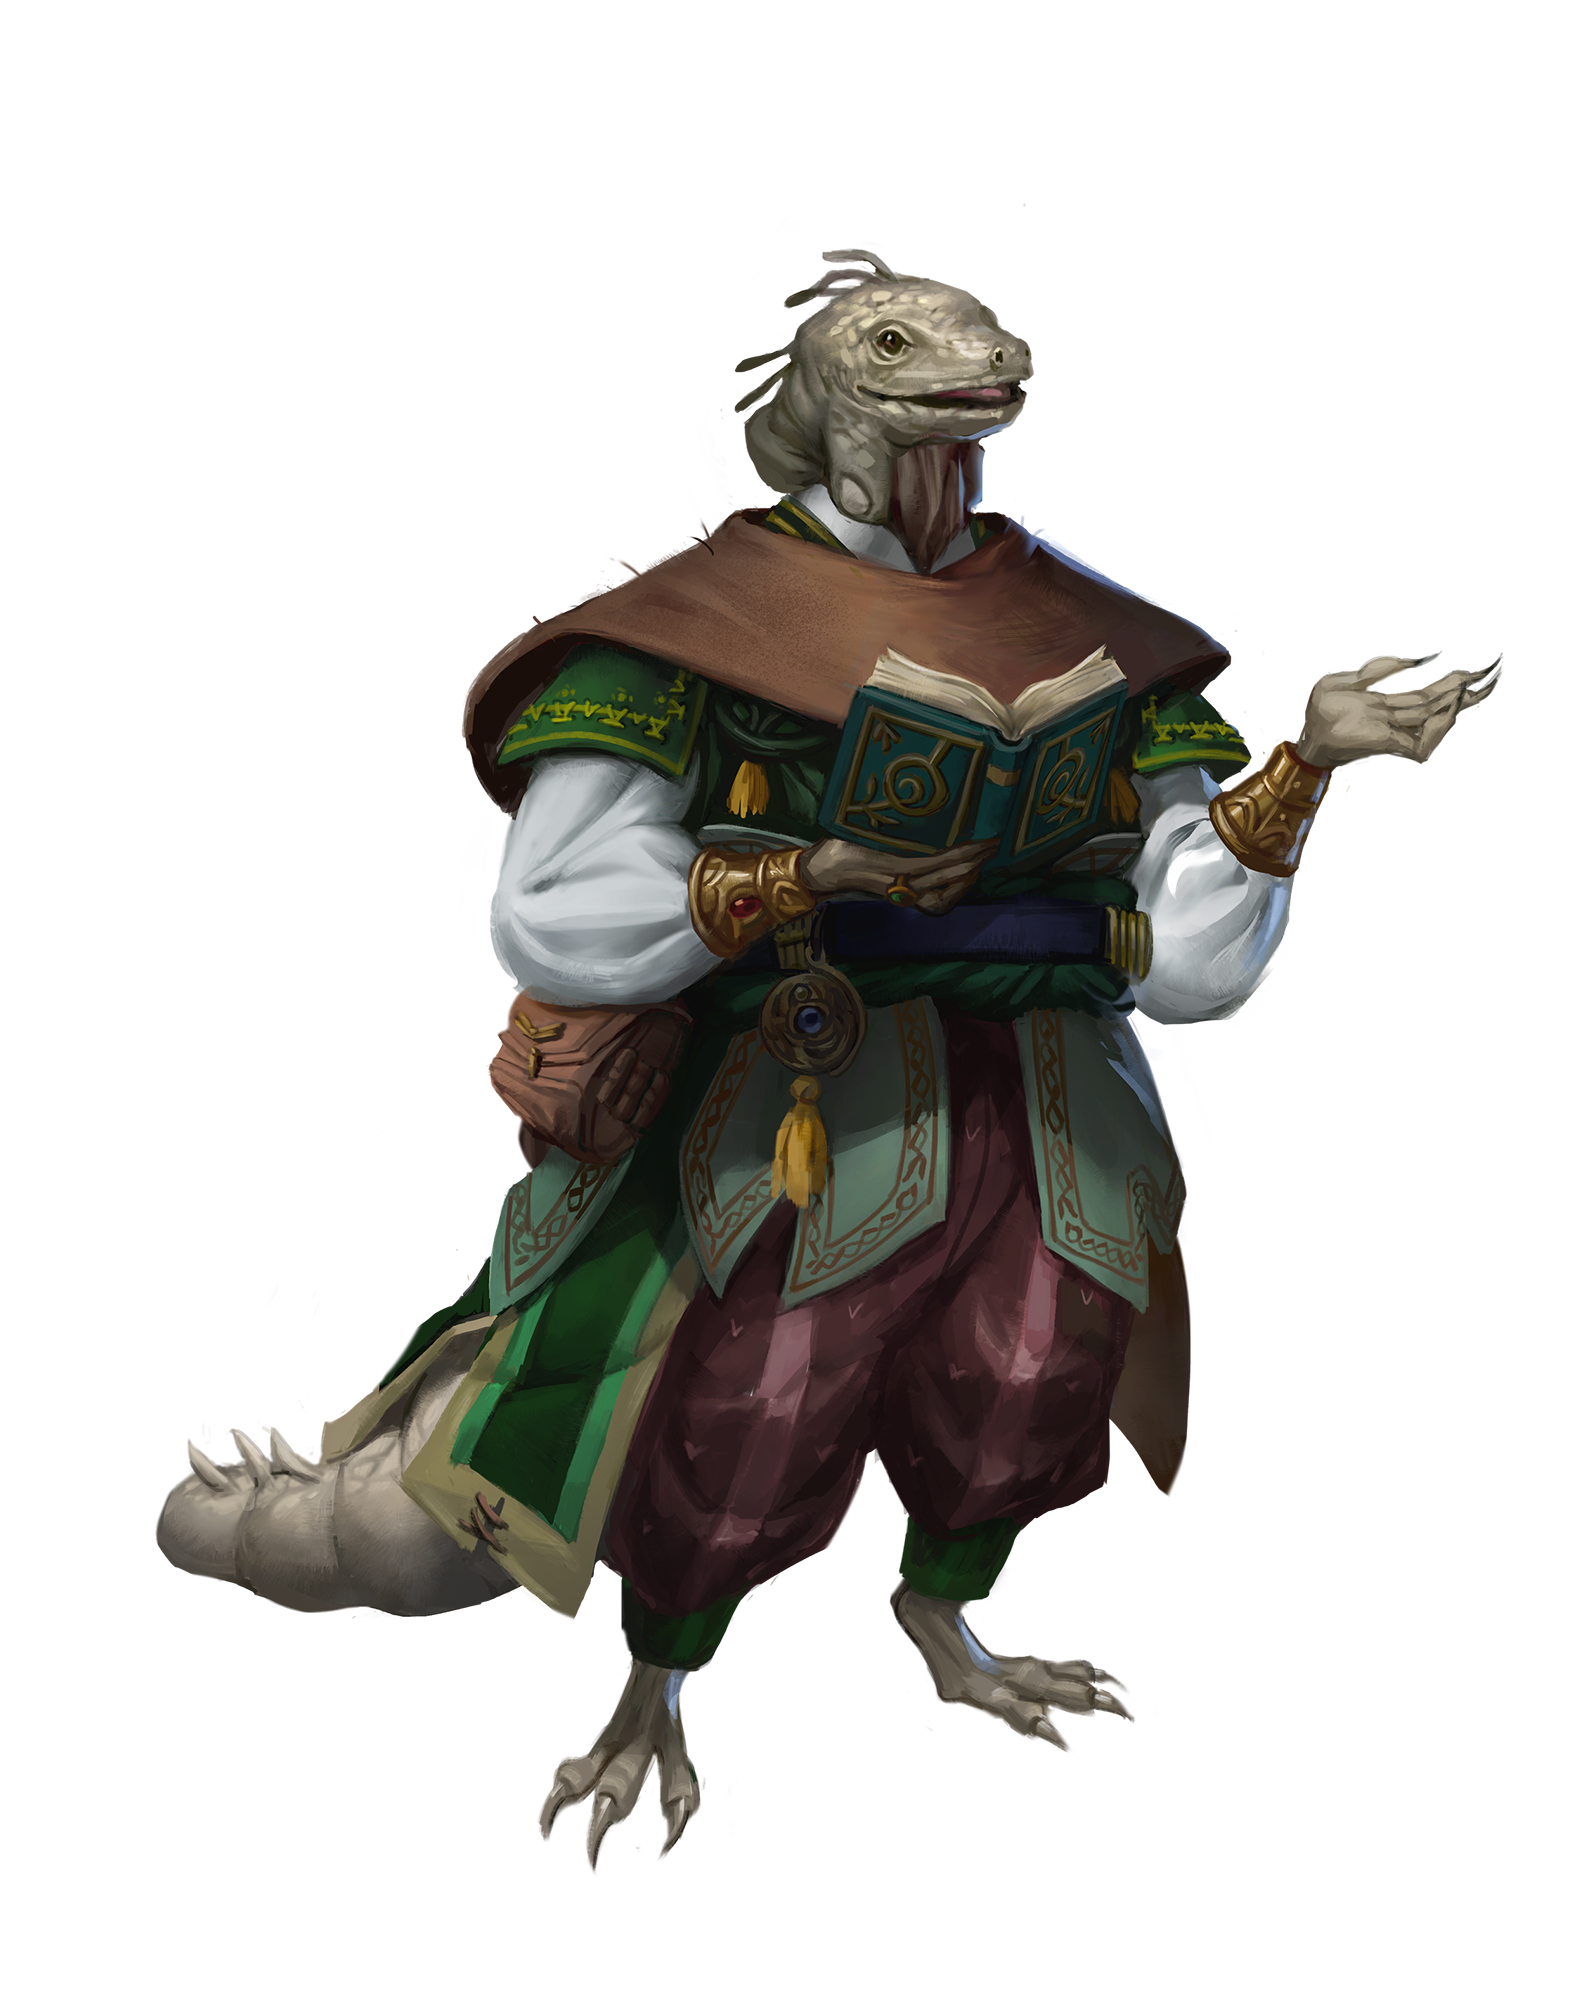  A humanoid with lizard-like featured dressed in natural colored layered clothing, holding a book open